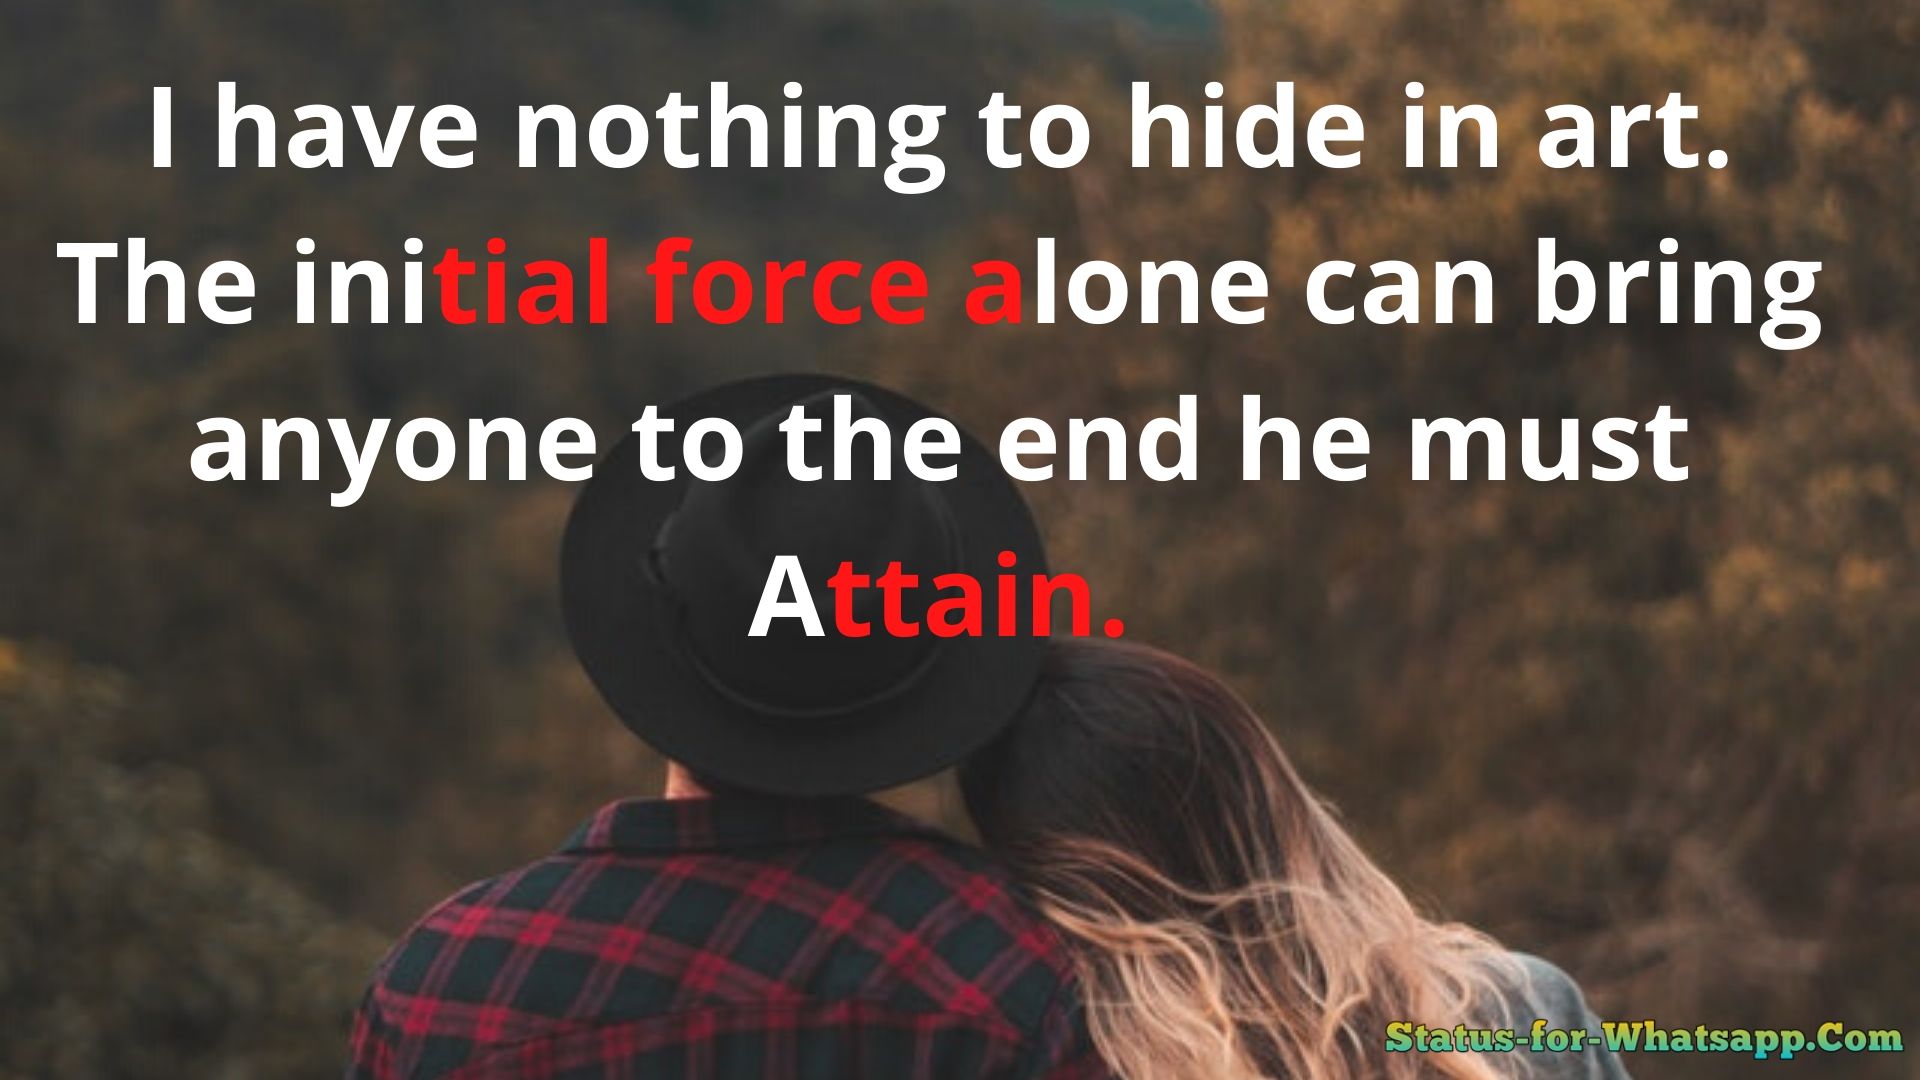  Alone Status,alone quotes, alone images, feeling alone, alone status, feeling quotes, being alone quotes, feeling alone quotes, lonely status, sad status in hindi for life, quotes on being alone